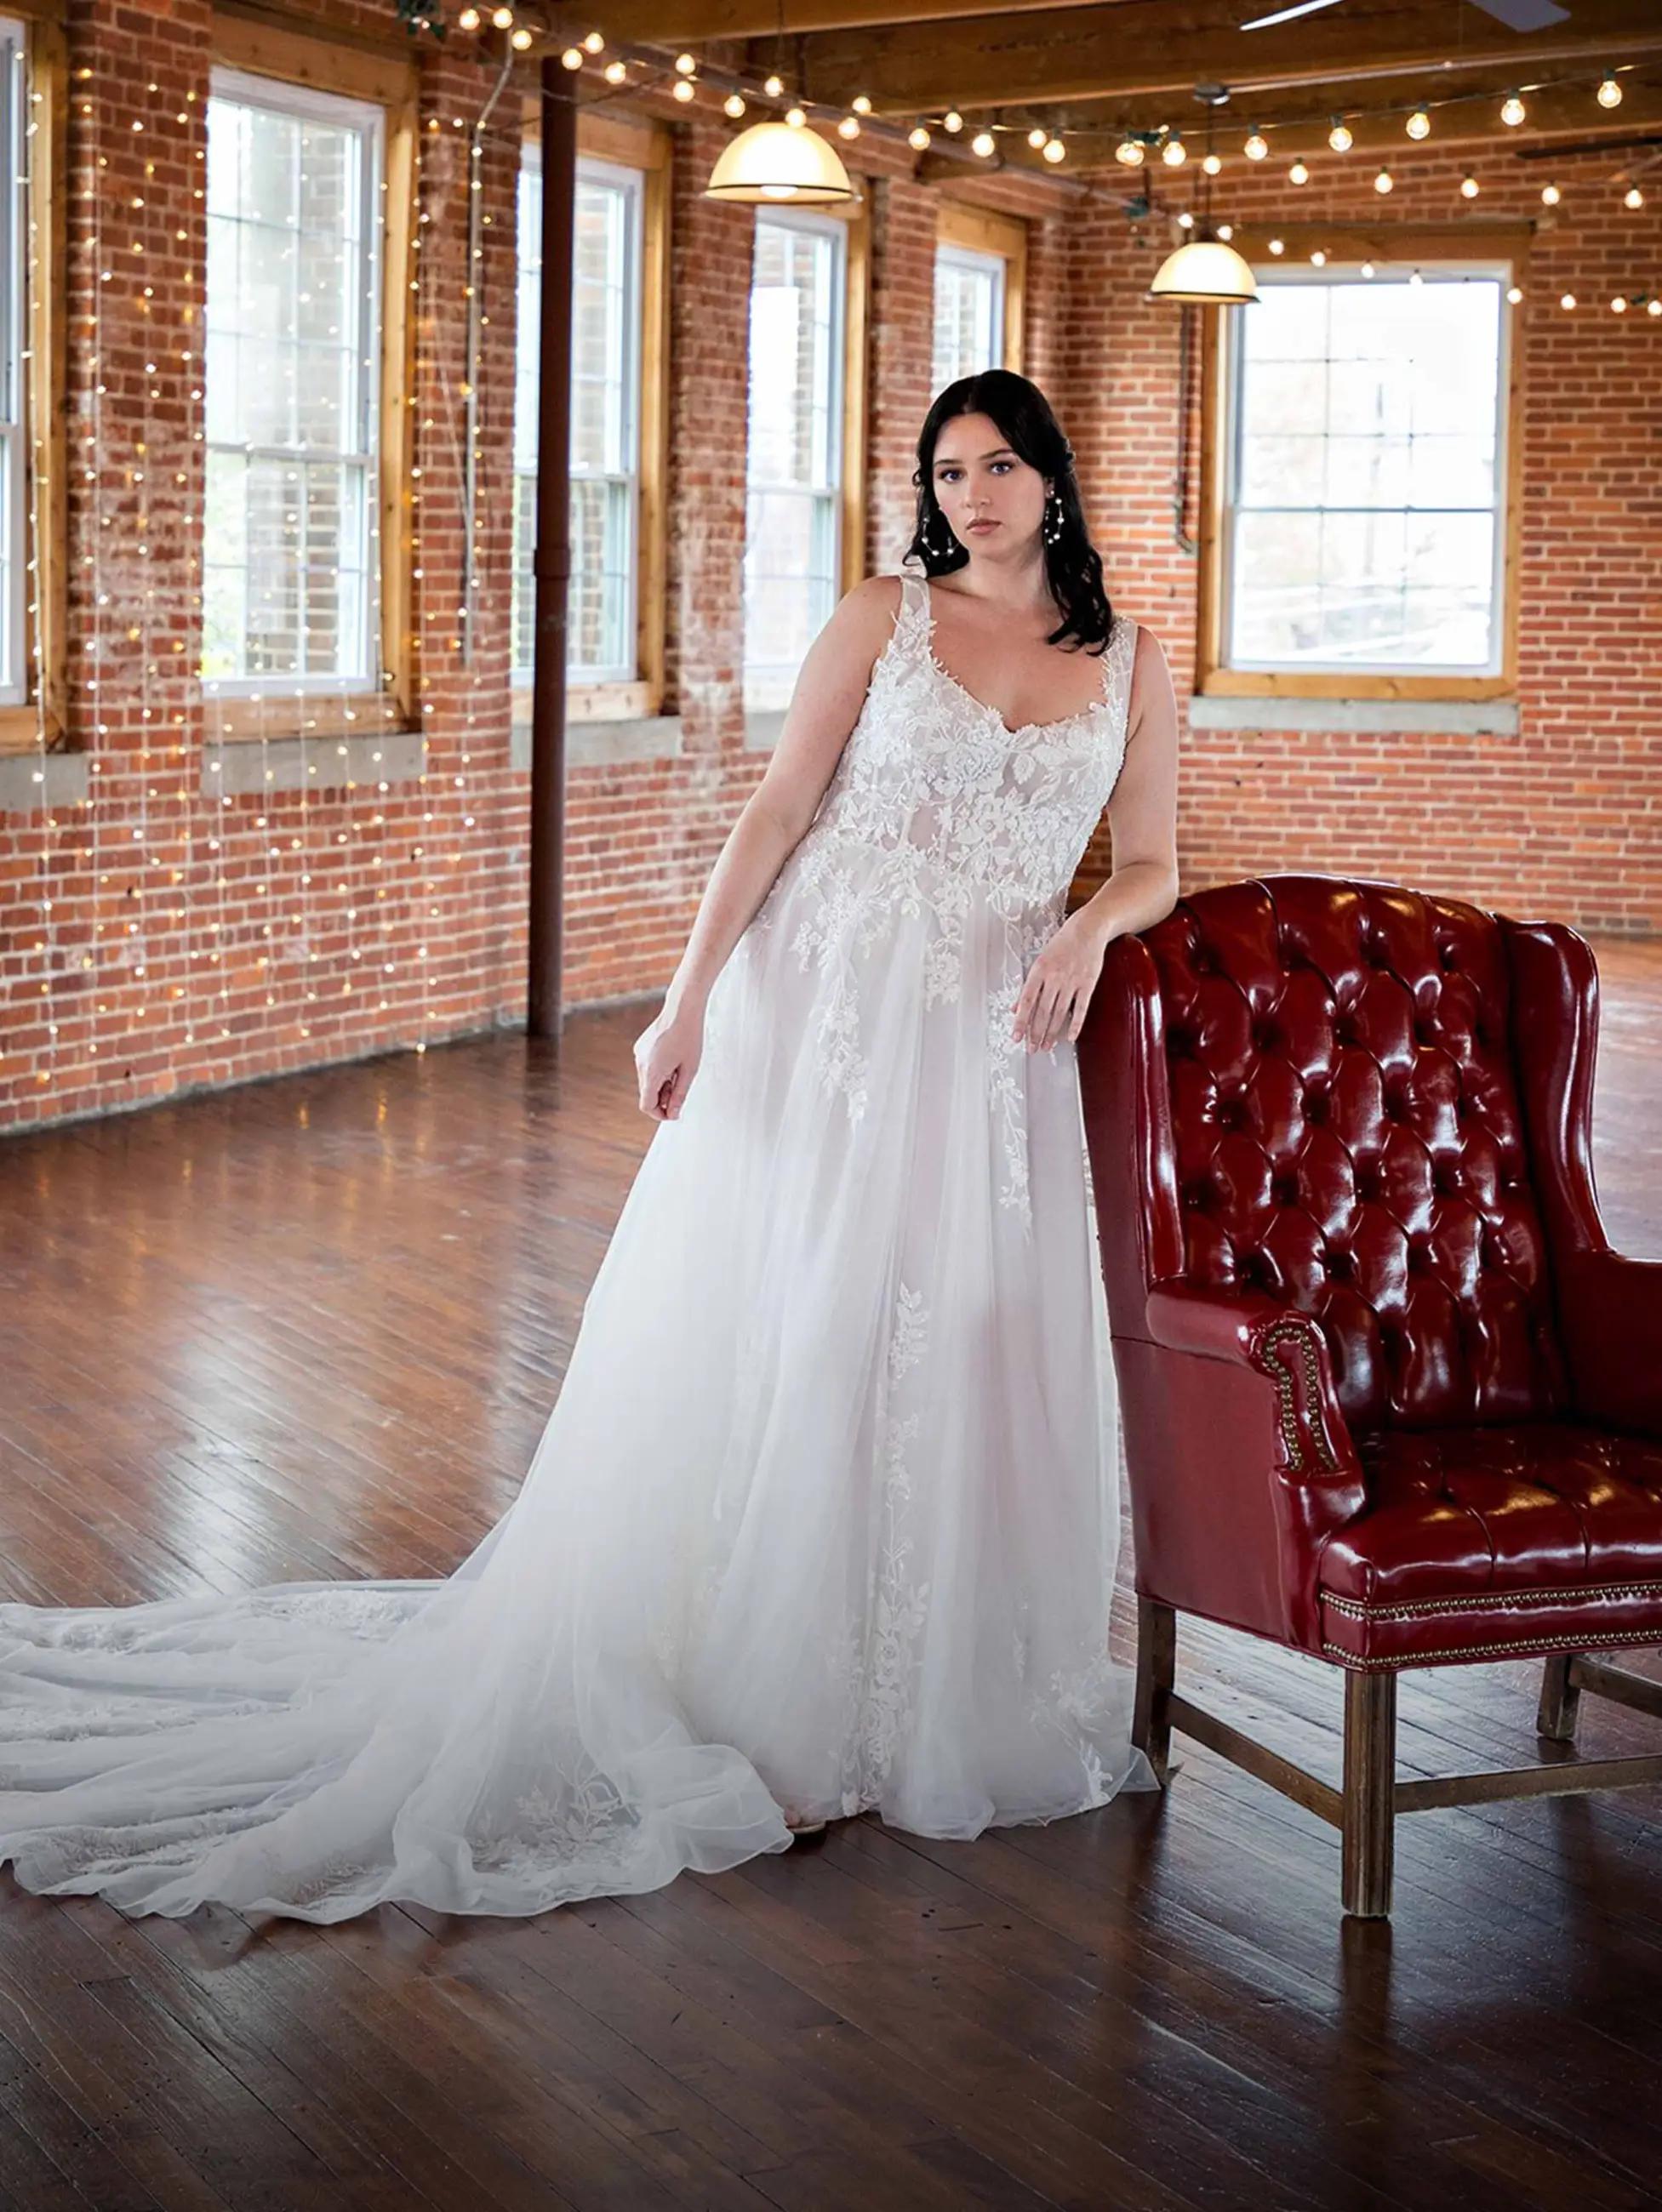 Orlando bridal shop, Model wearing a white gown by Plus Size